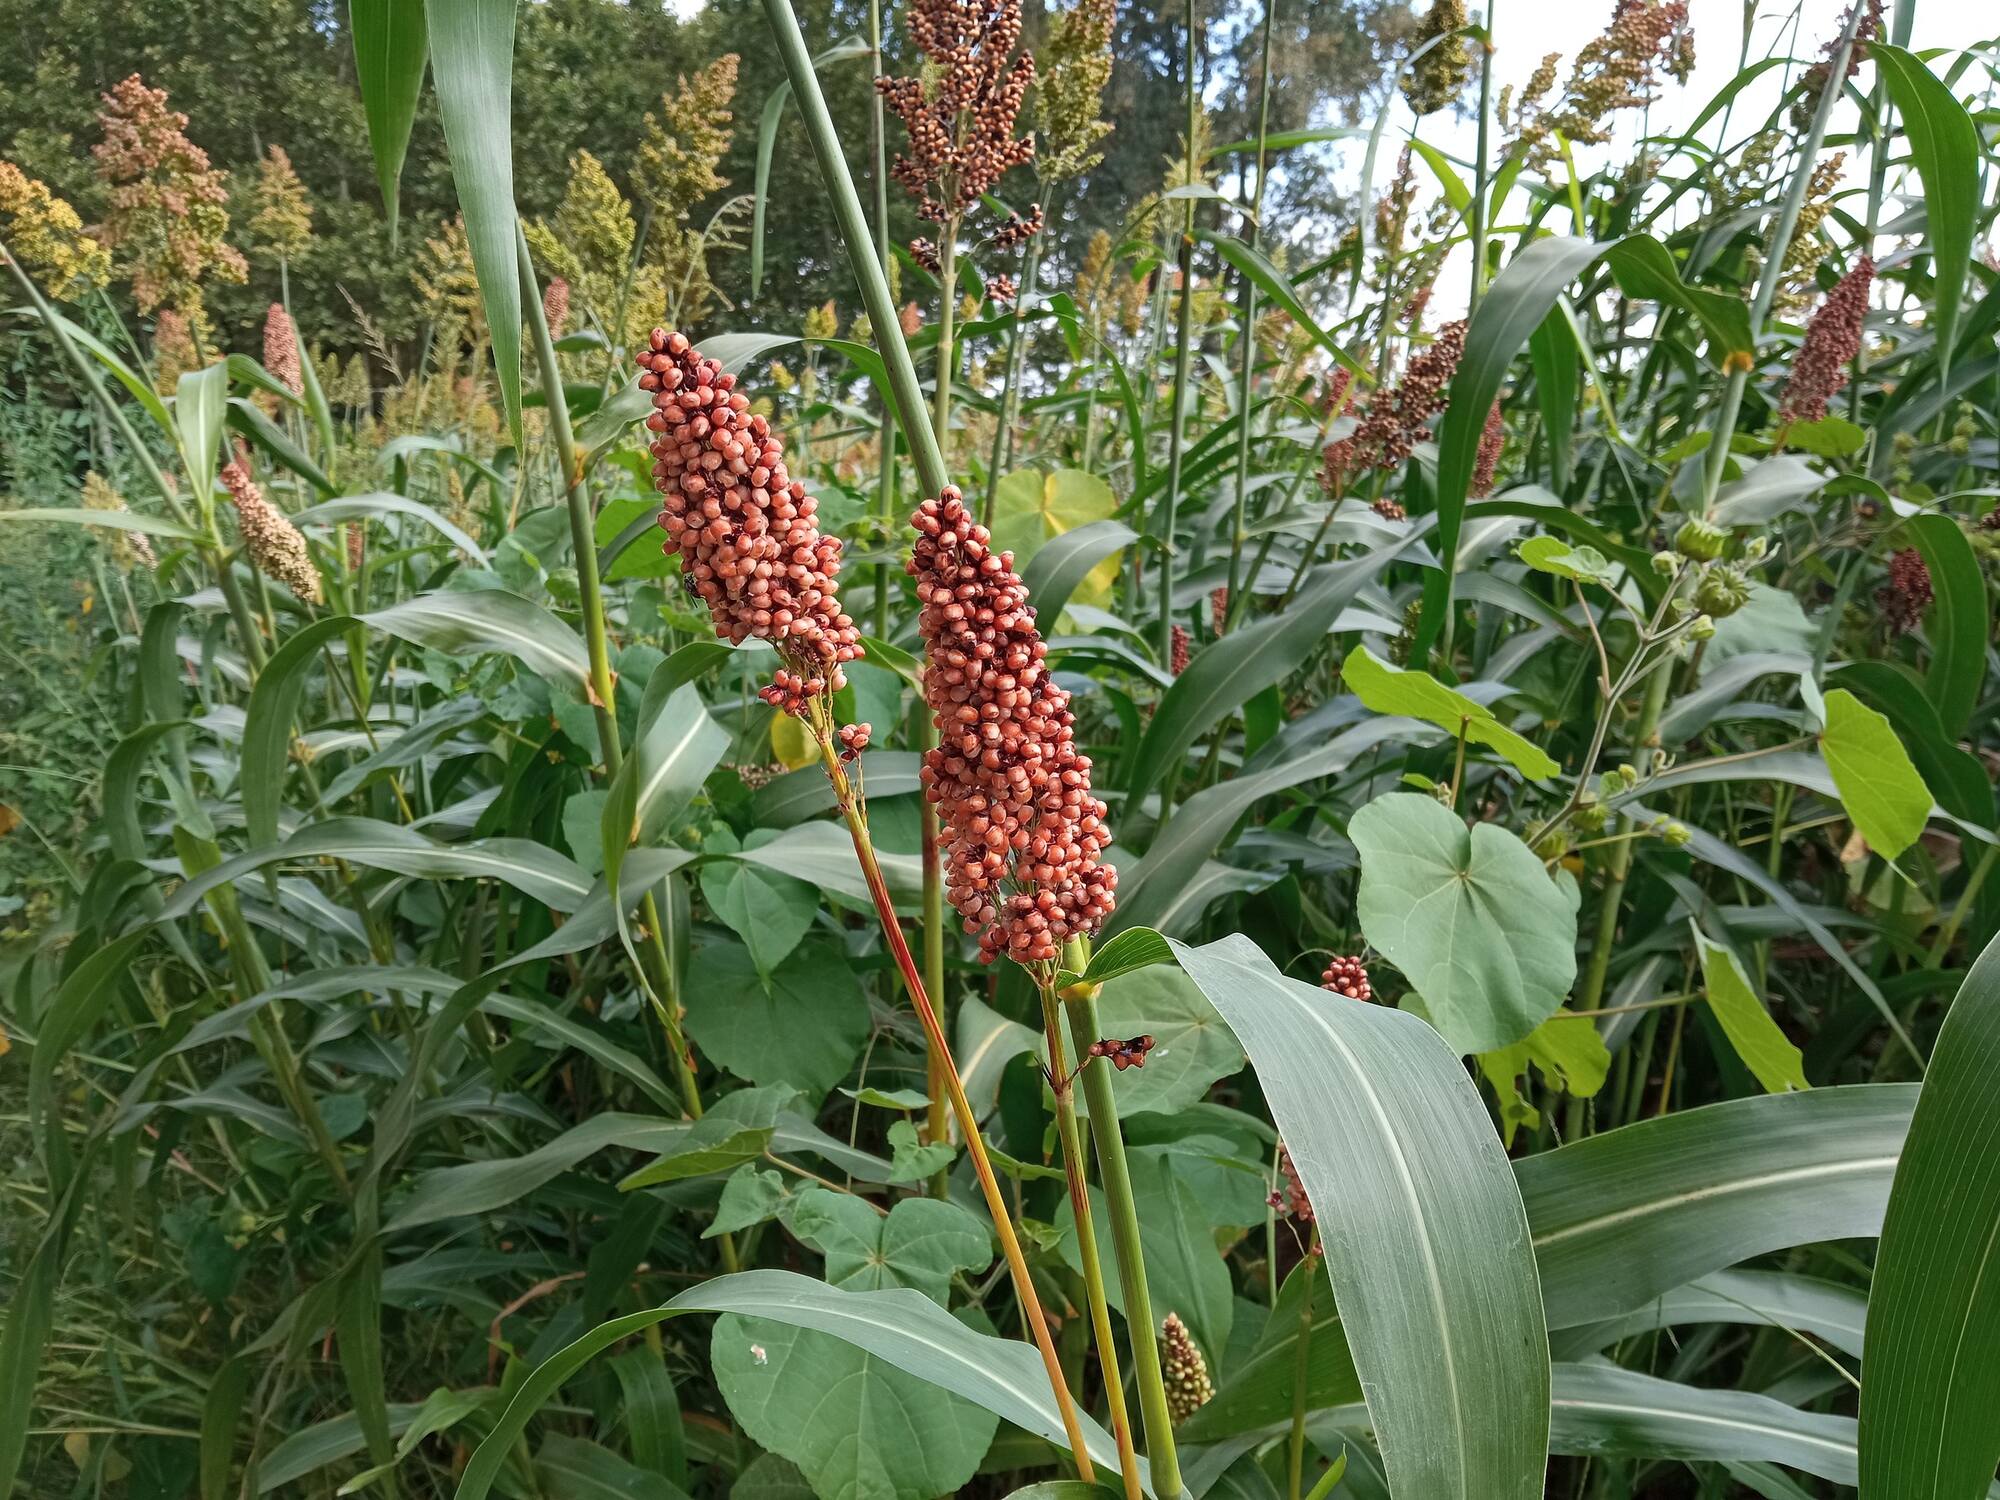 Photograph of sorghum bicolor in a field. The plant has red grains in a cone-shaped inflorescence. 